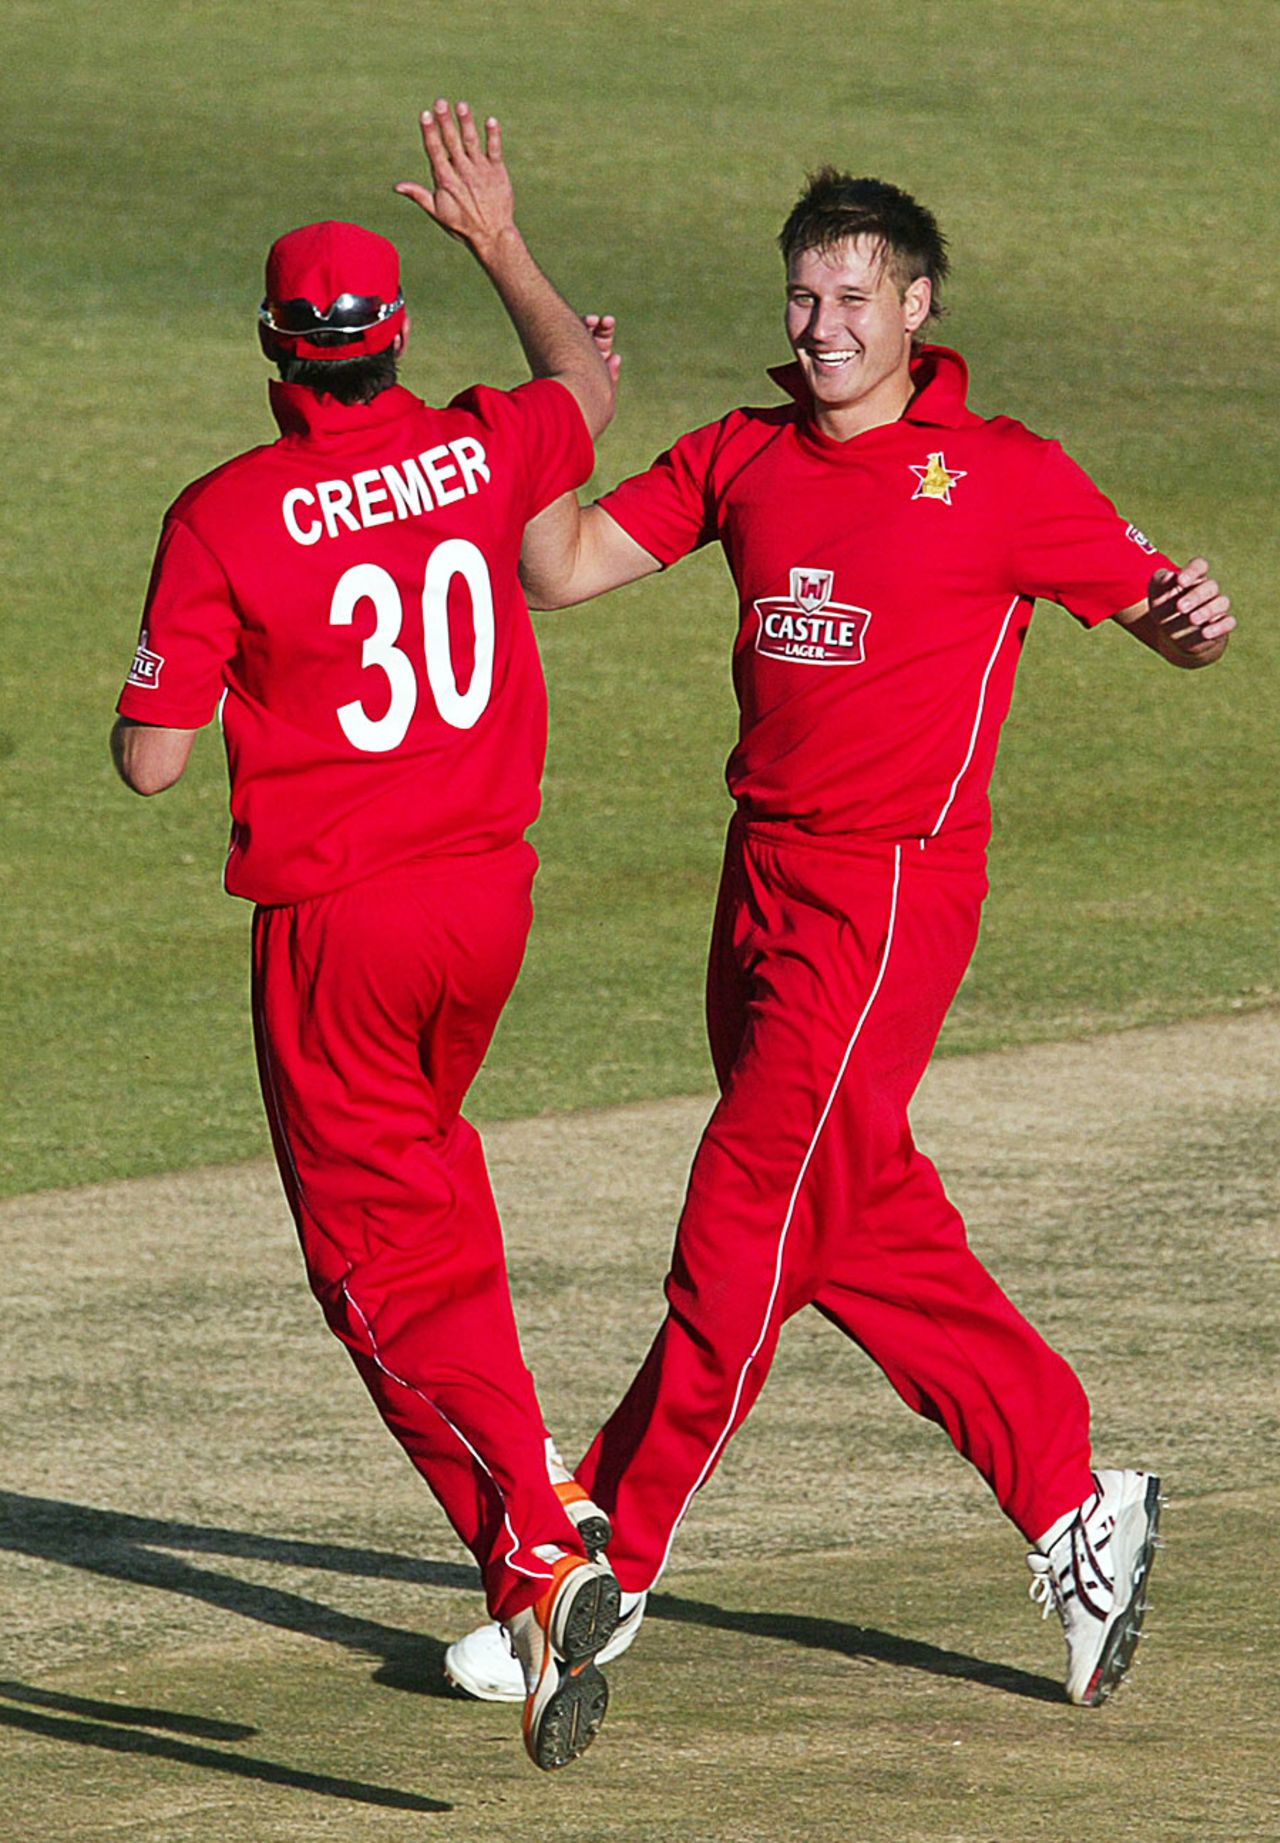 Graeme Cremer and Kyle Jarvis celebrate the final wicket, Zimbabwe v South Africa, T20 tri-series, Harare, June 20, 2012